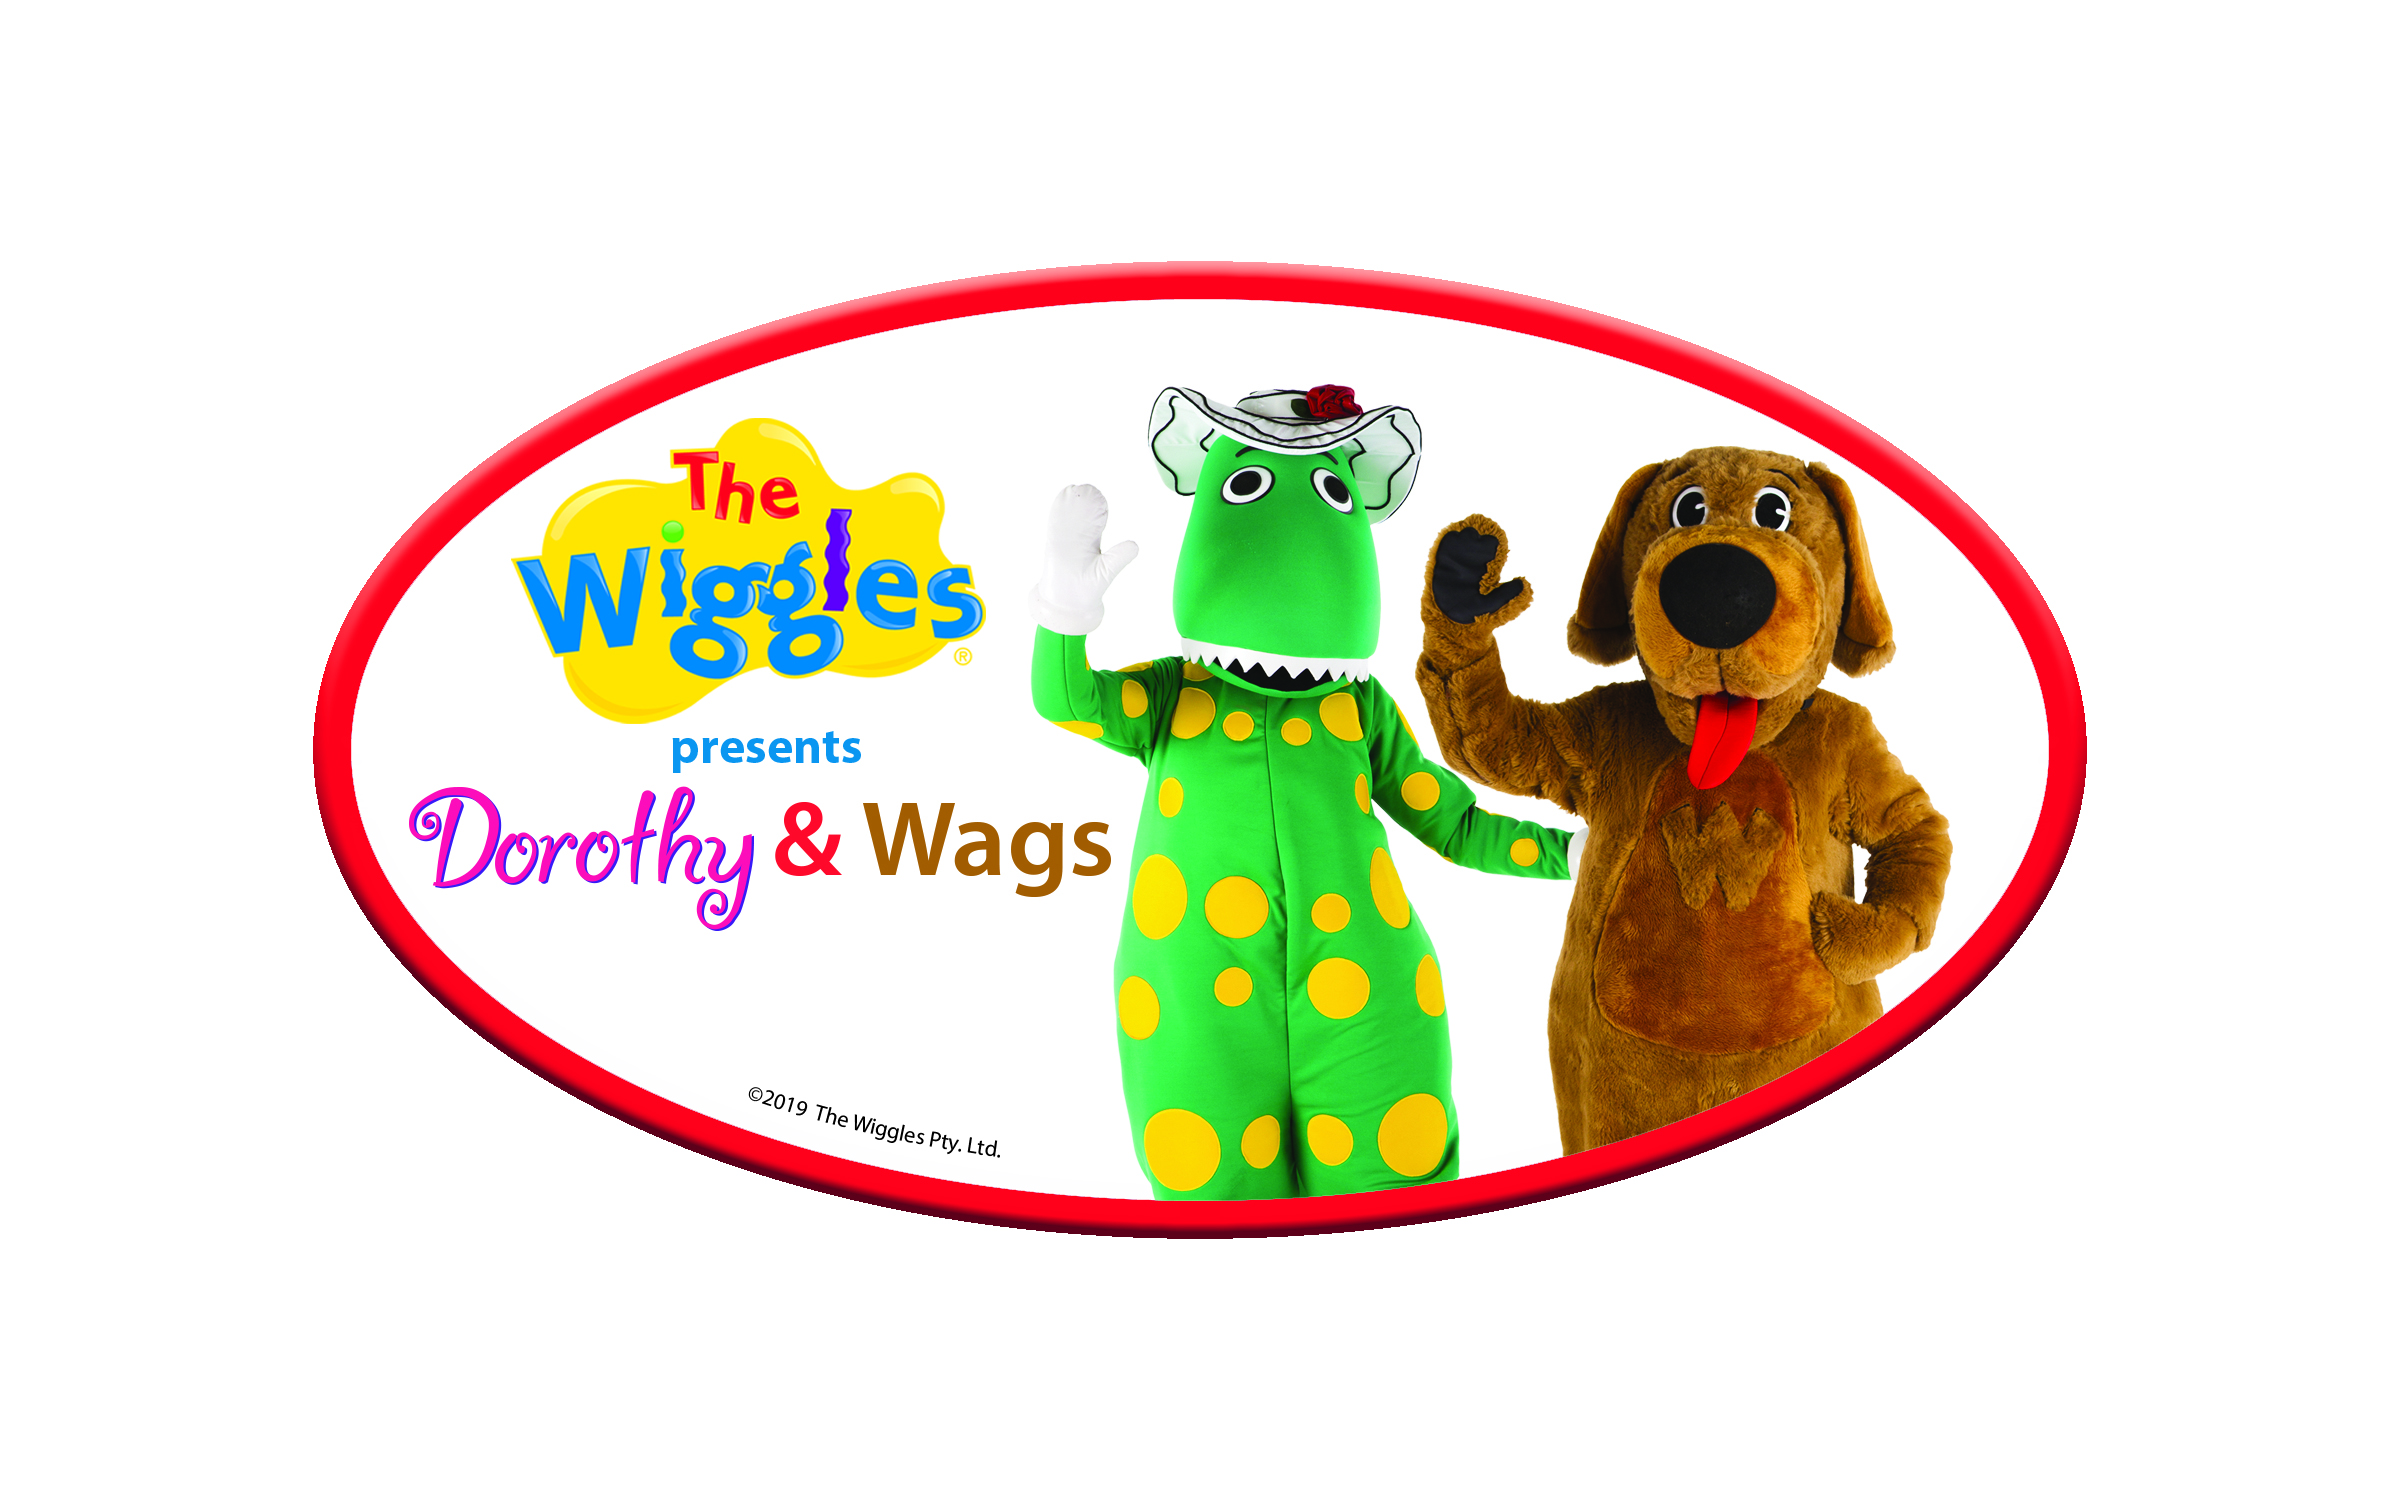 The Wiggles Dorothy and Wags